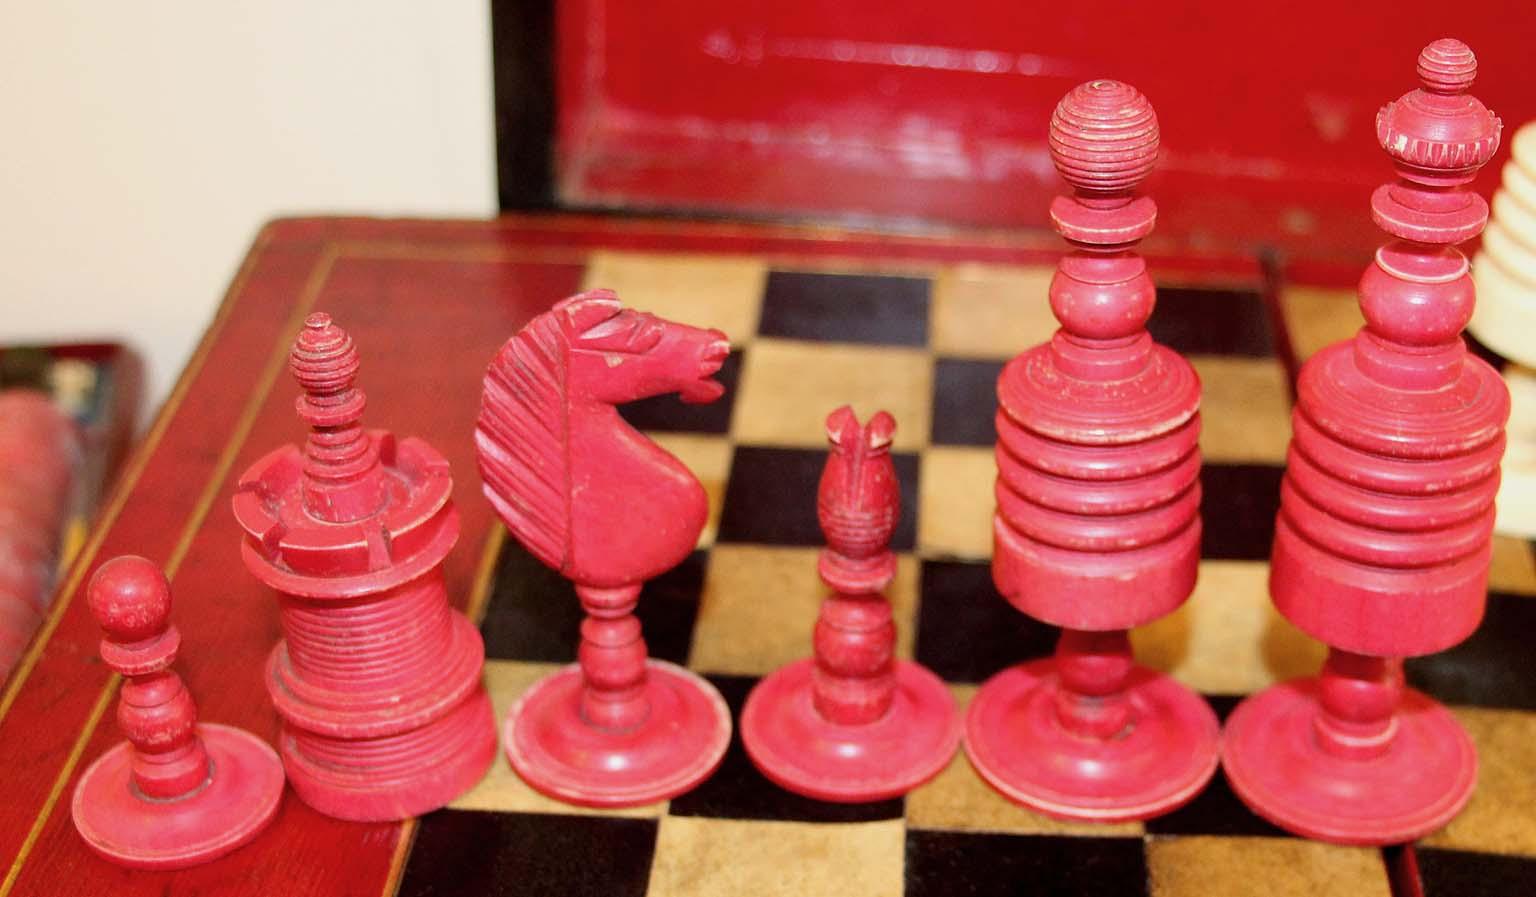 Hardwood Victorian Game Set-Chess, Checkers, Backgammon, Dominoes and Cards